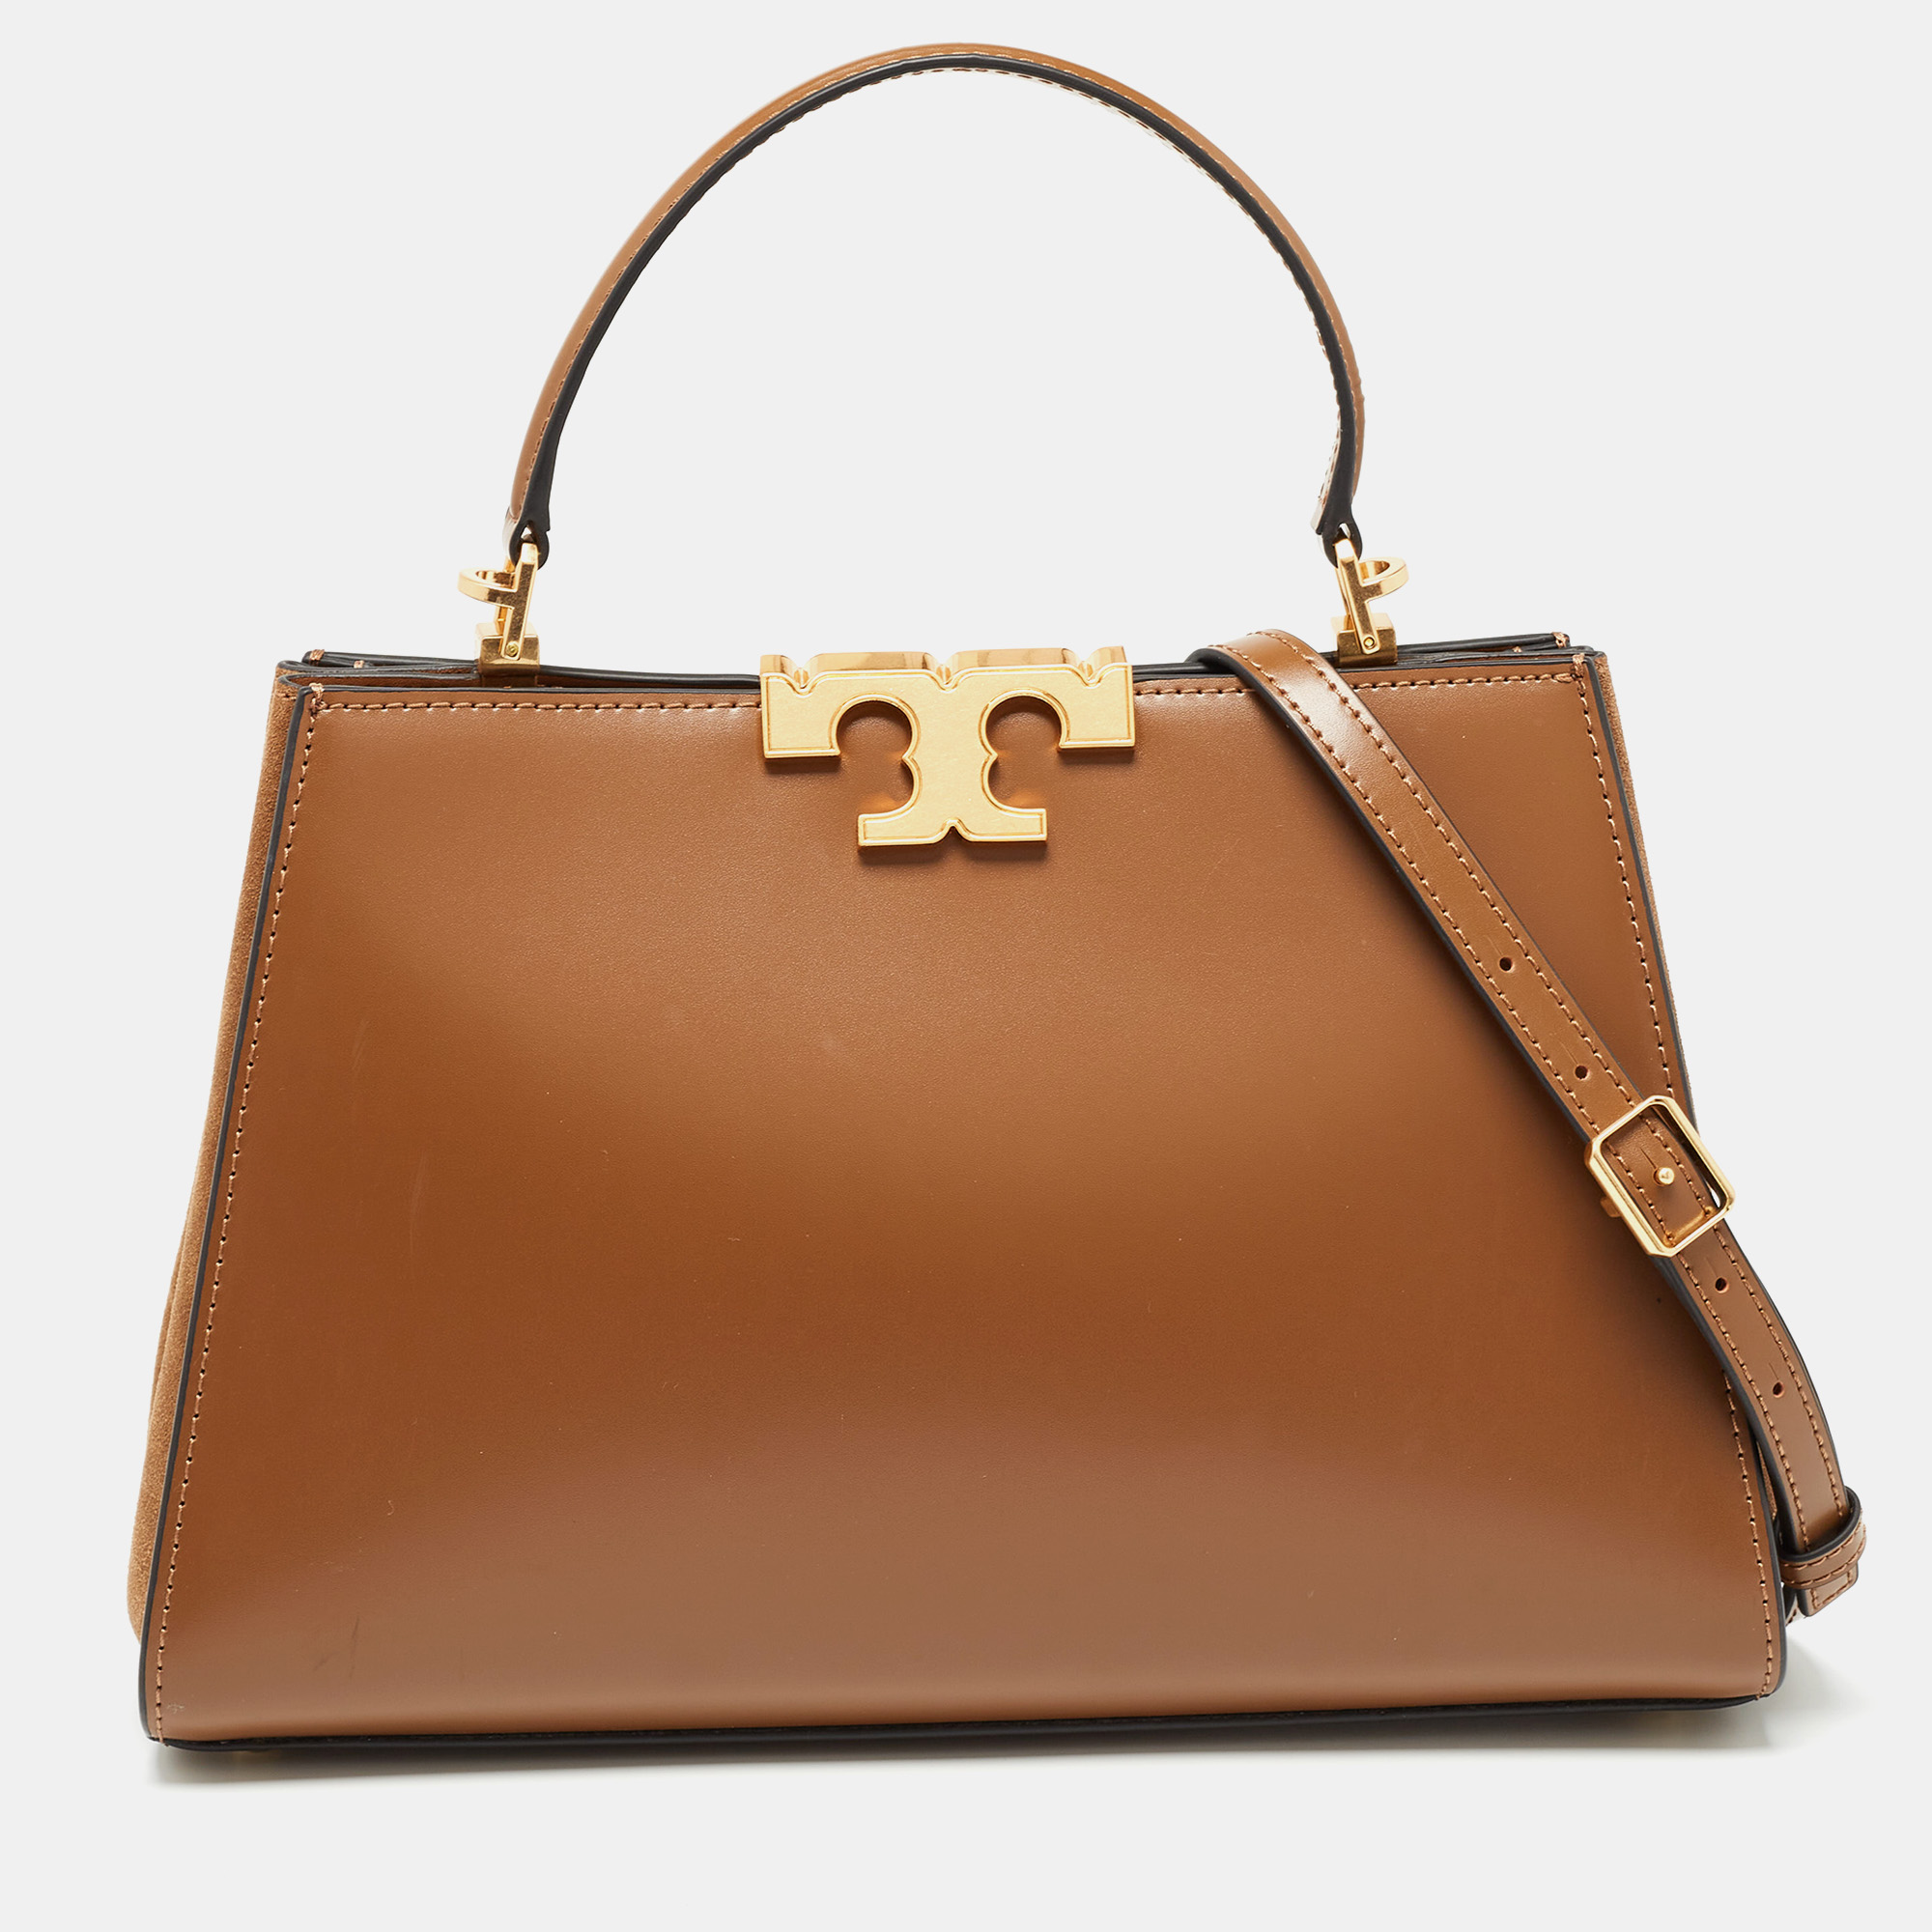 Indulge in luxury with this Tory Burch bag. Meticulously crafted from premium materials it combines exquisite design impeccable craftsmanship and timeless elegance. Elevate your style with this fashion accessory.